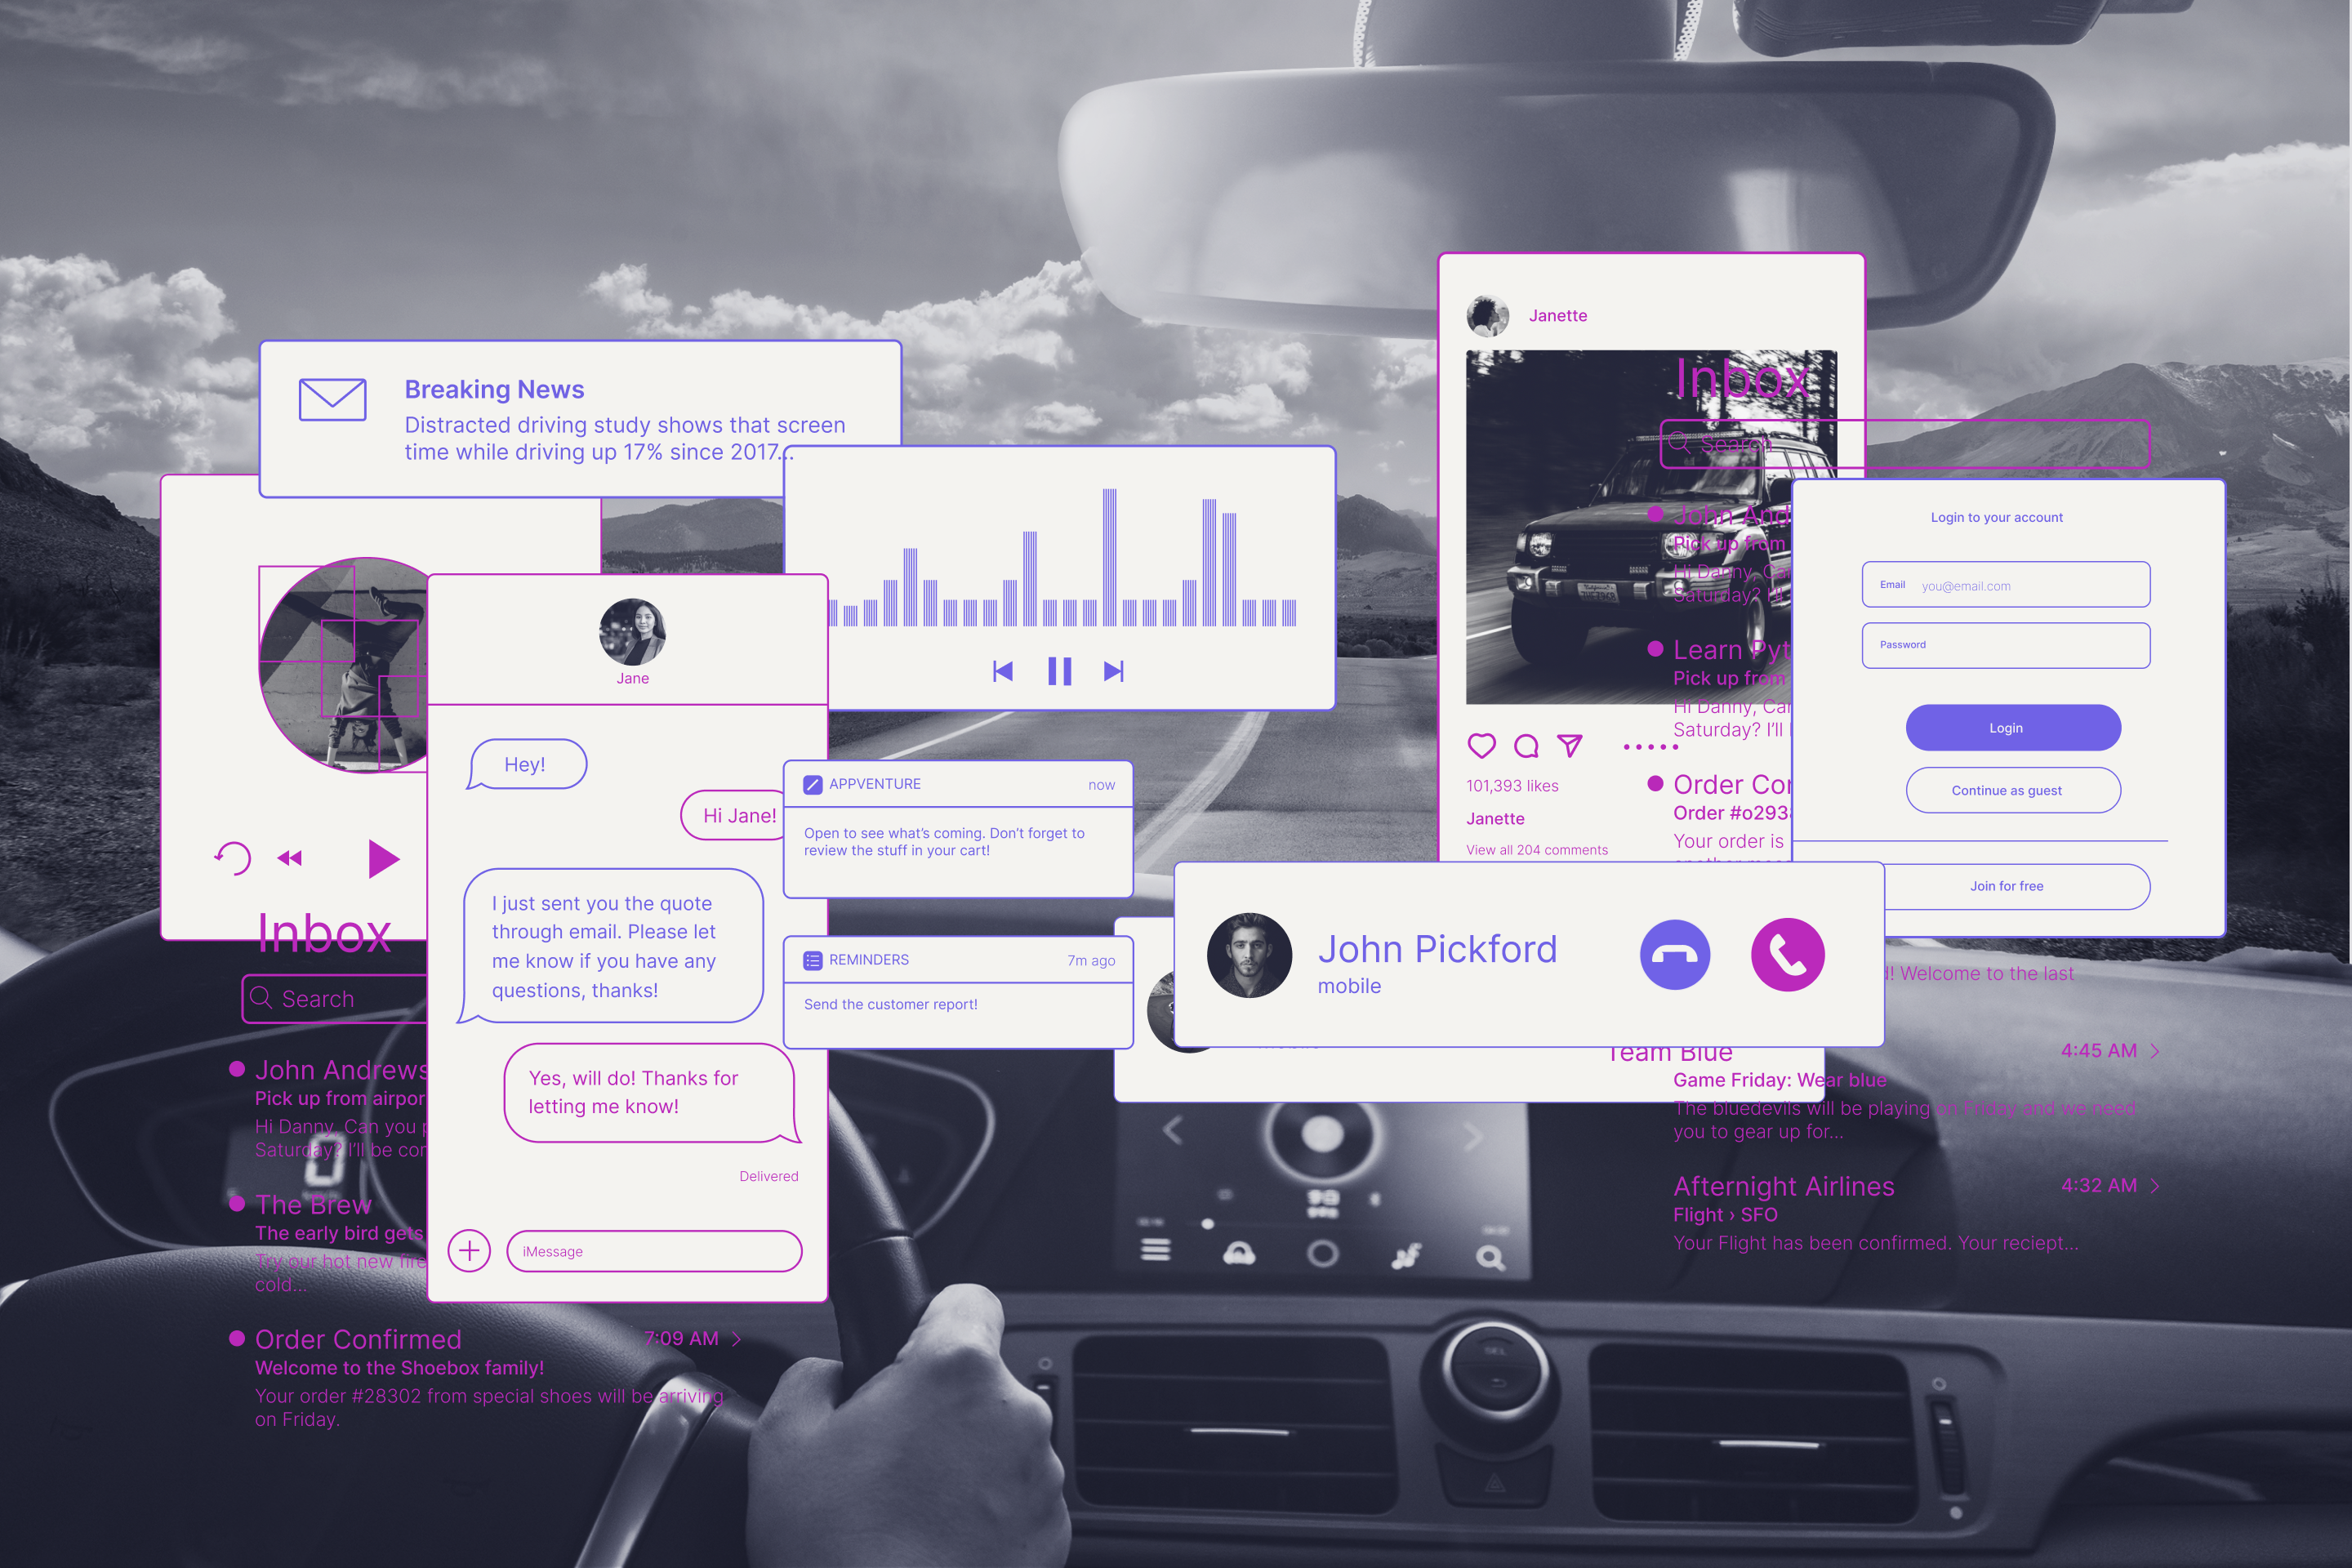 Collage of images showing vehicle and phone notifications like social media, email, music, and phone calls to represent distracted driving trends.